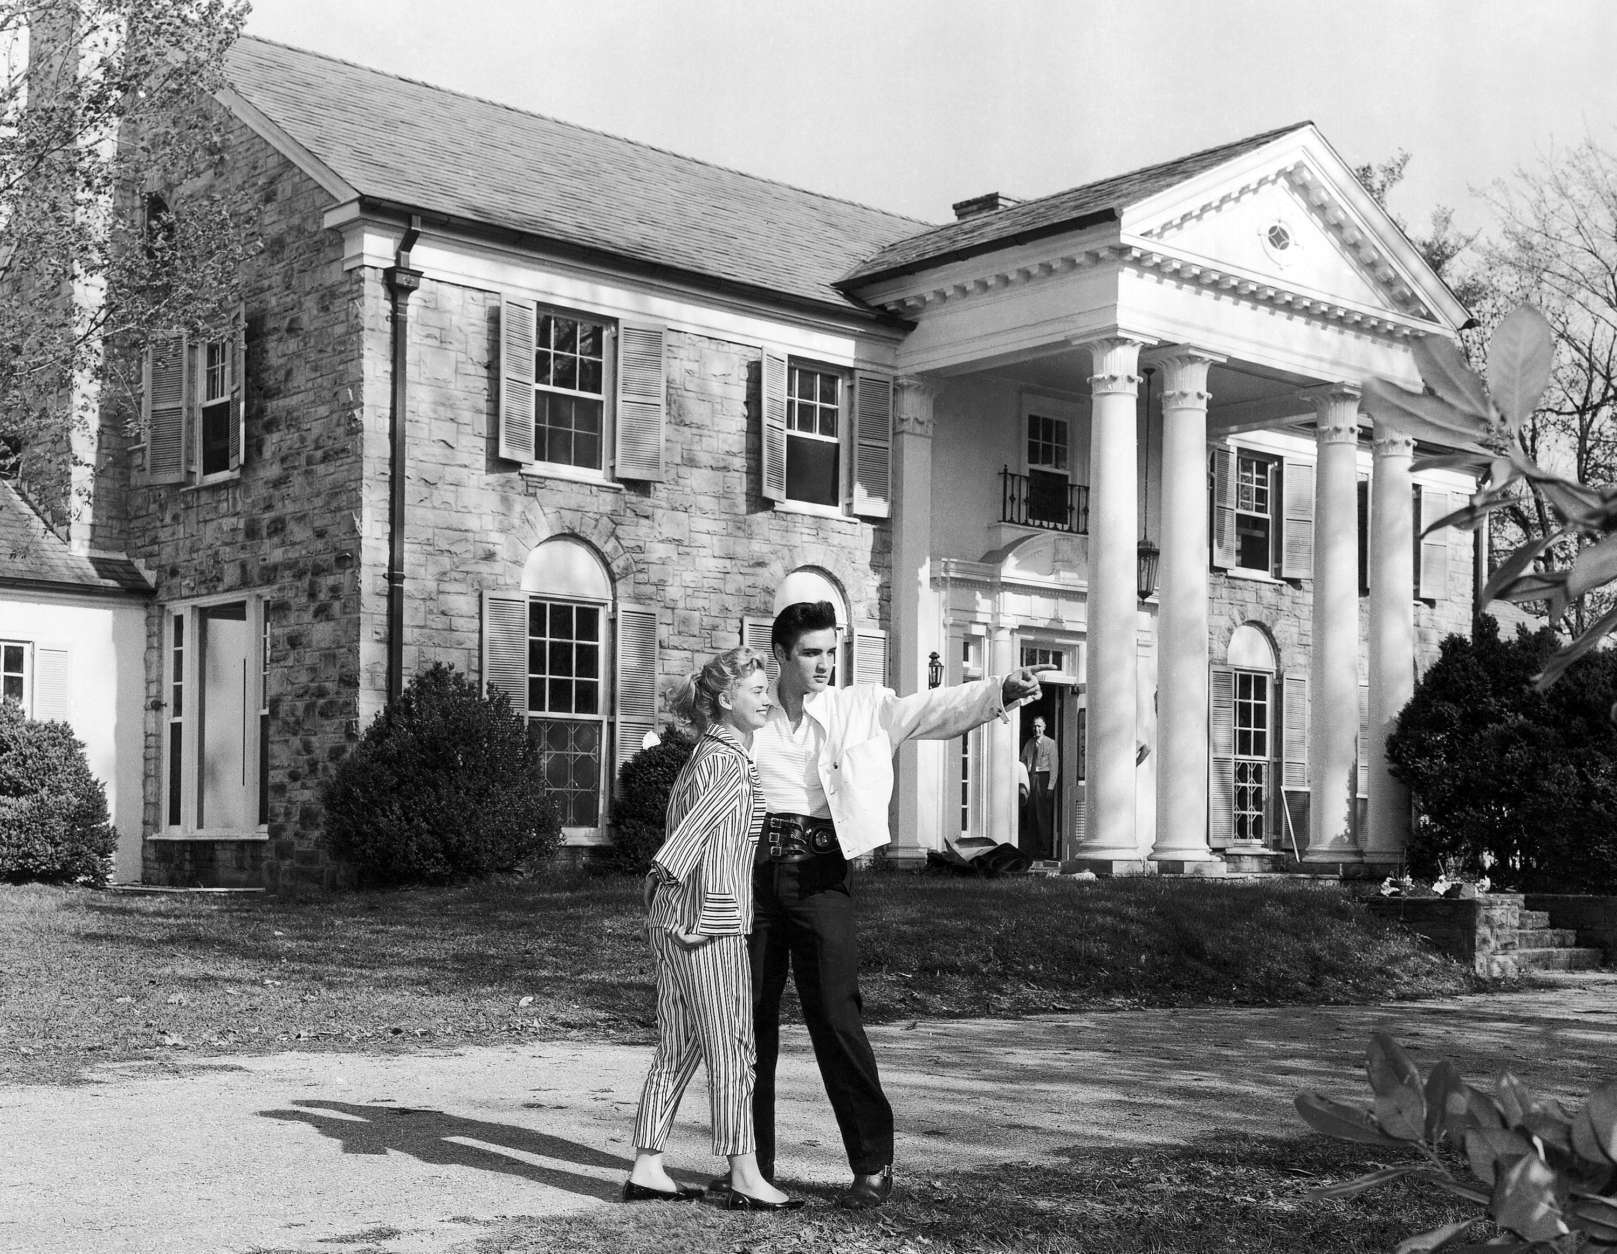 Elvis Presley with his girlfriend Yvonne Lime at his home Graceland in Memphis, Tennessee around 1957. (AP Photo)